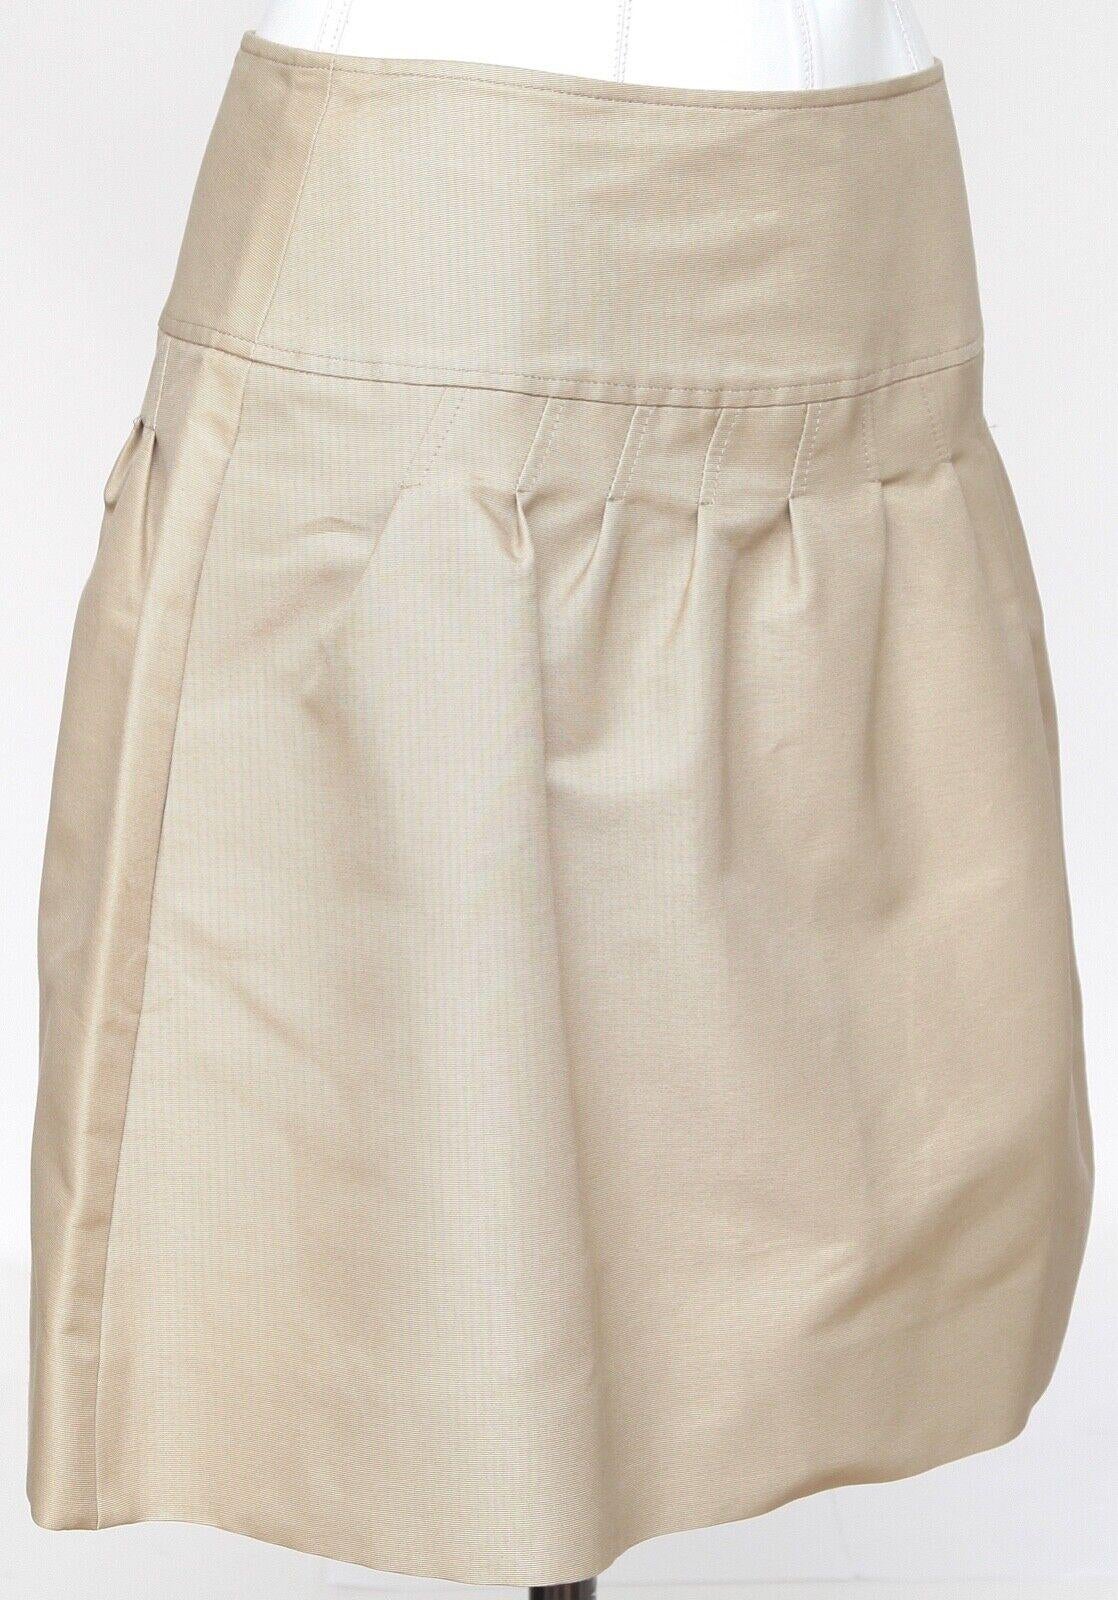 GUARANTEED AUTHENTIC VALENTINO BEIGE A-LINE PLEATED SKIRT


Details:
- Timeless A-line silk skirt in a khaki beige color.
- Yoke waist.
- Pleating.
- Side zipper closure.
- Unlined.

Material: 80% Cotton, 20% Silk

Size: 4

Measurements (Approximate